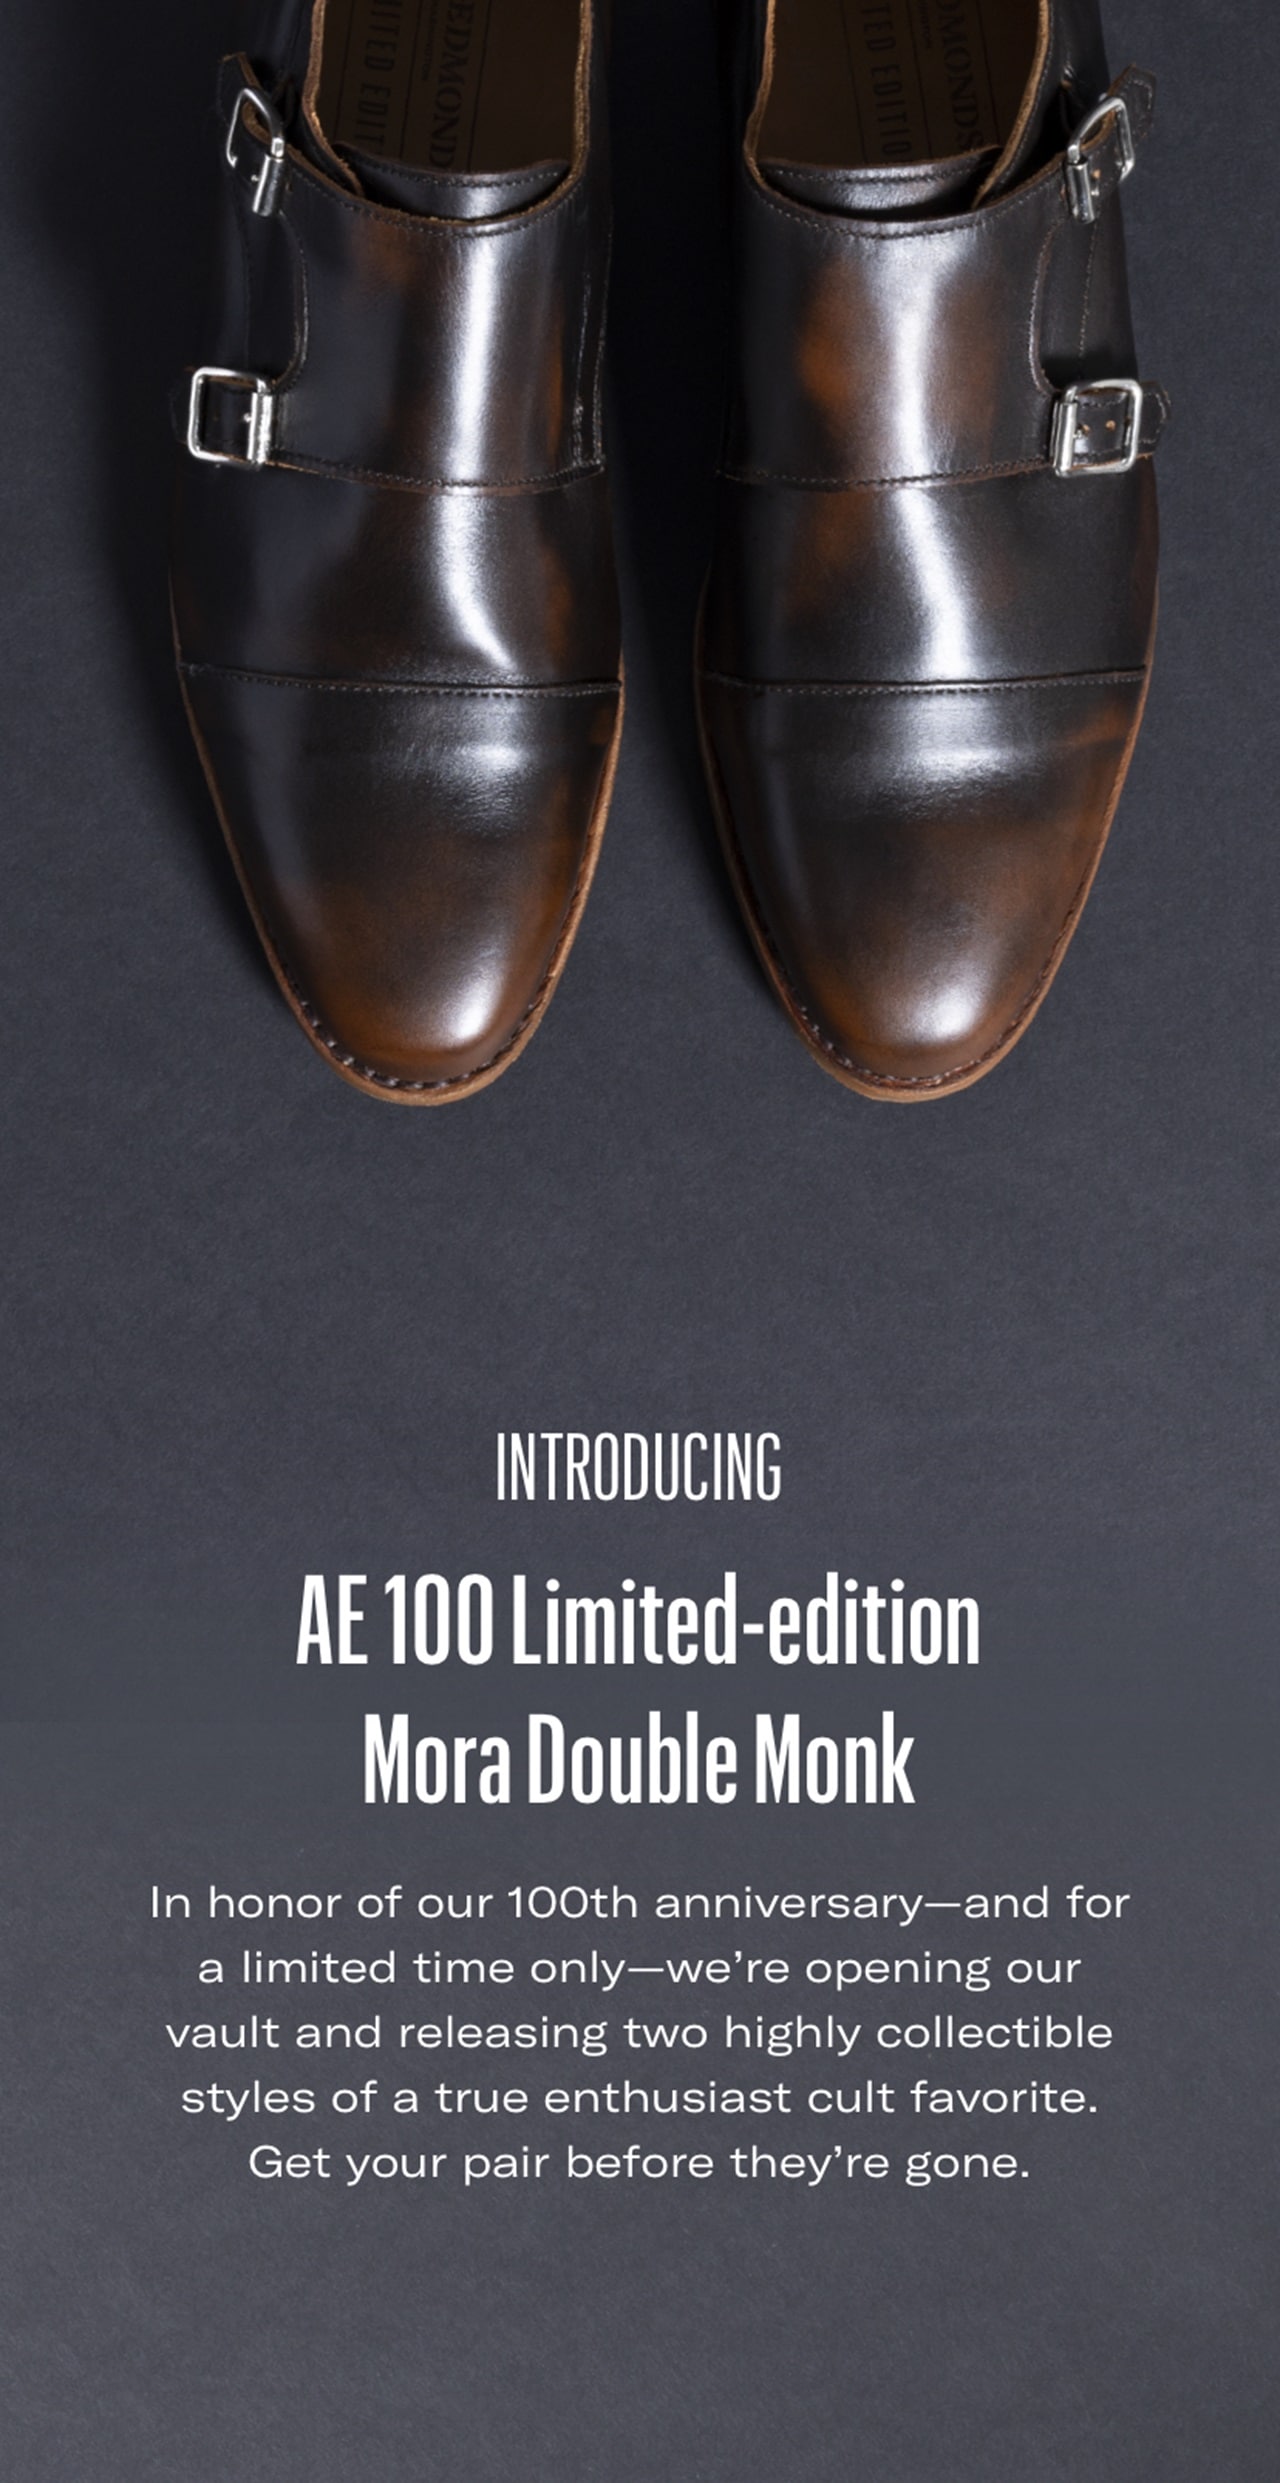 Introducing AE 100 Limited-edition  Mora Double Monk. In honor of our 100th anniversary—and for a limited time only—we’re opening our vault and releasing two highly collectible styles of a true enthusiast cult favorite. Get your pair before they’re gone.